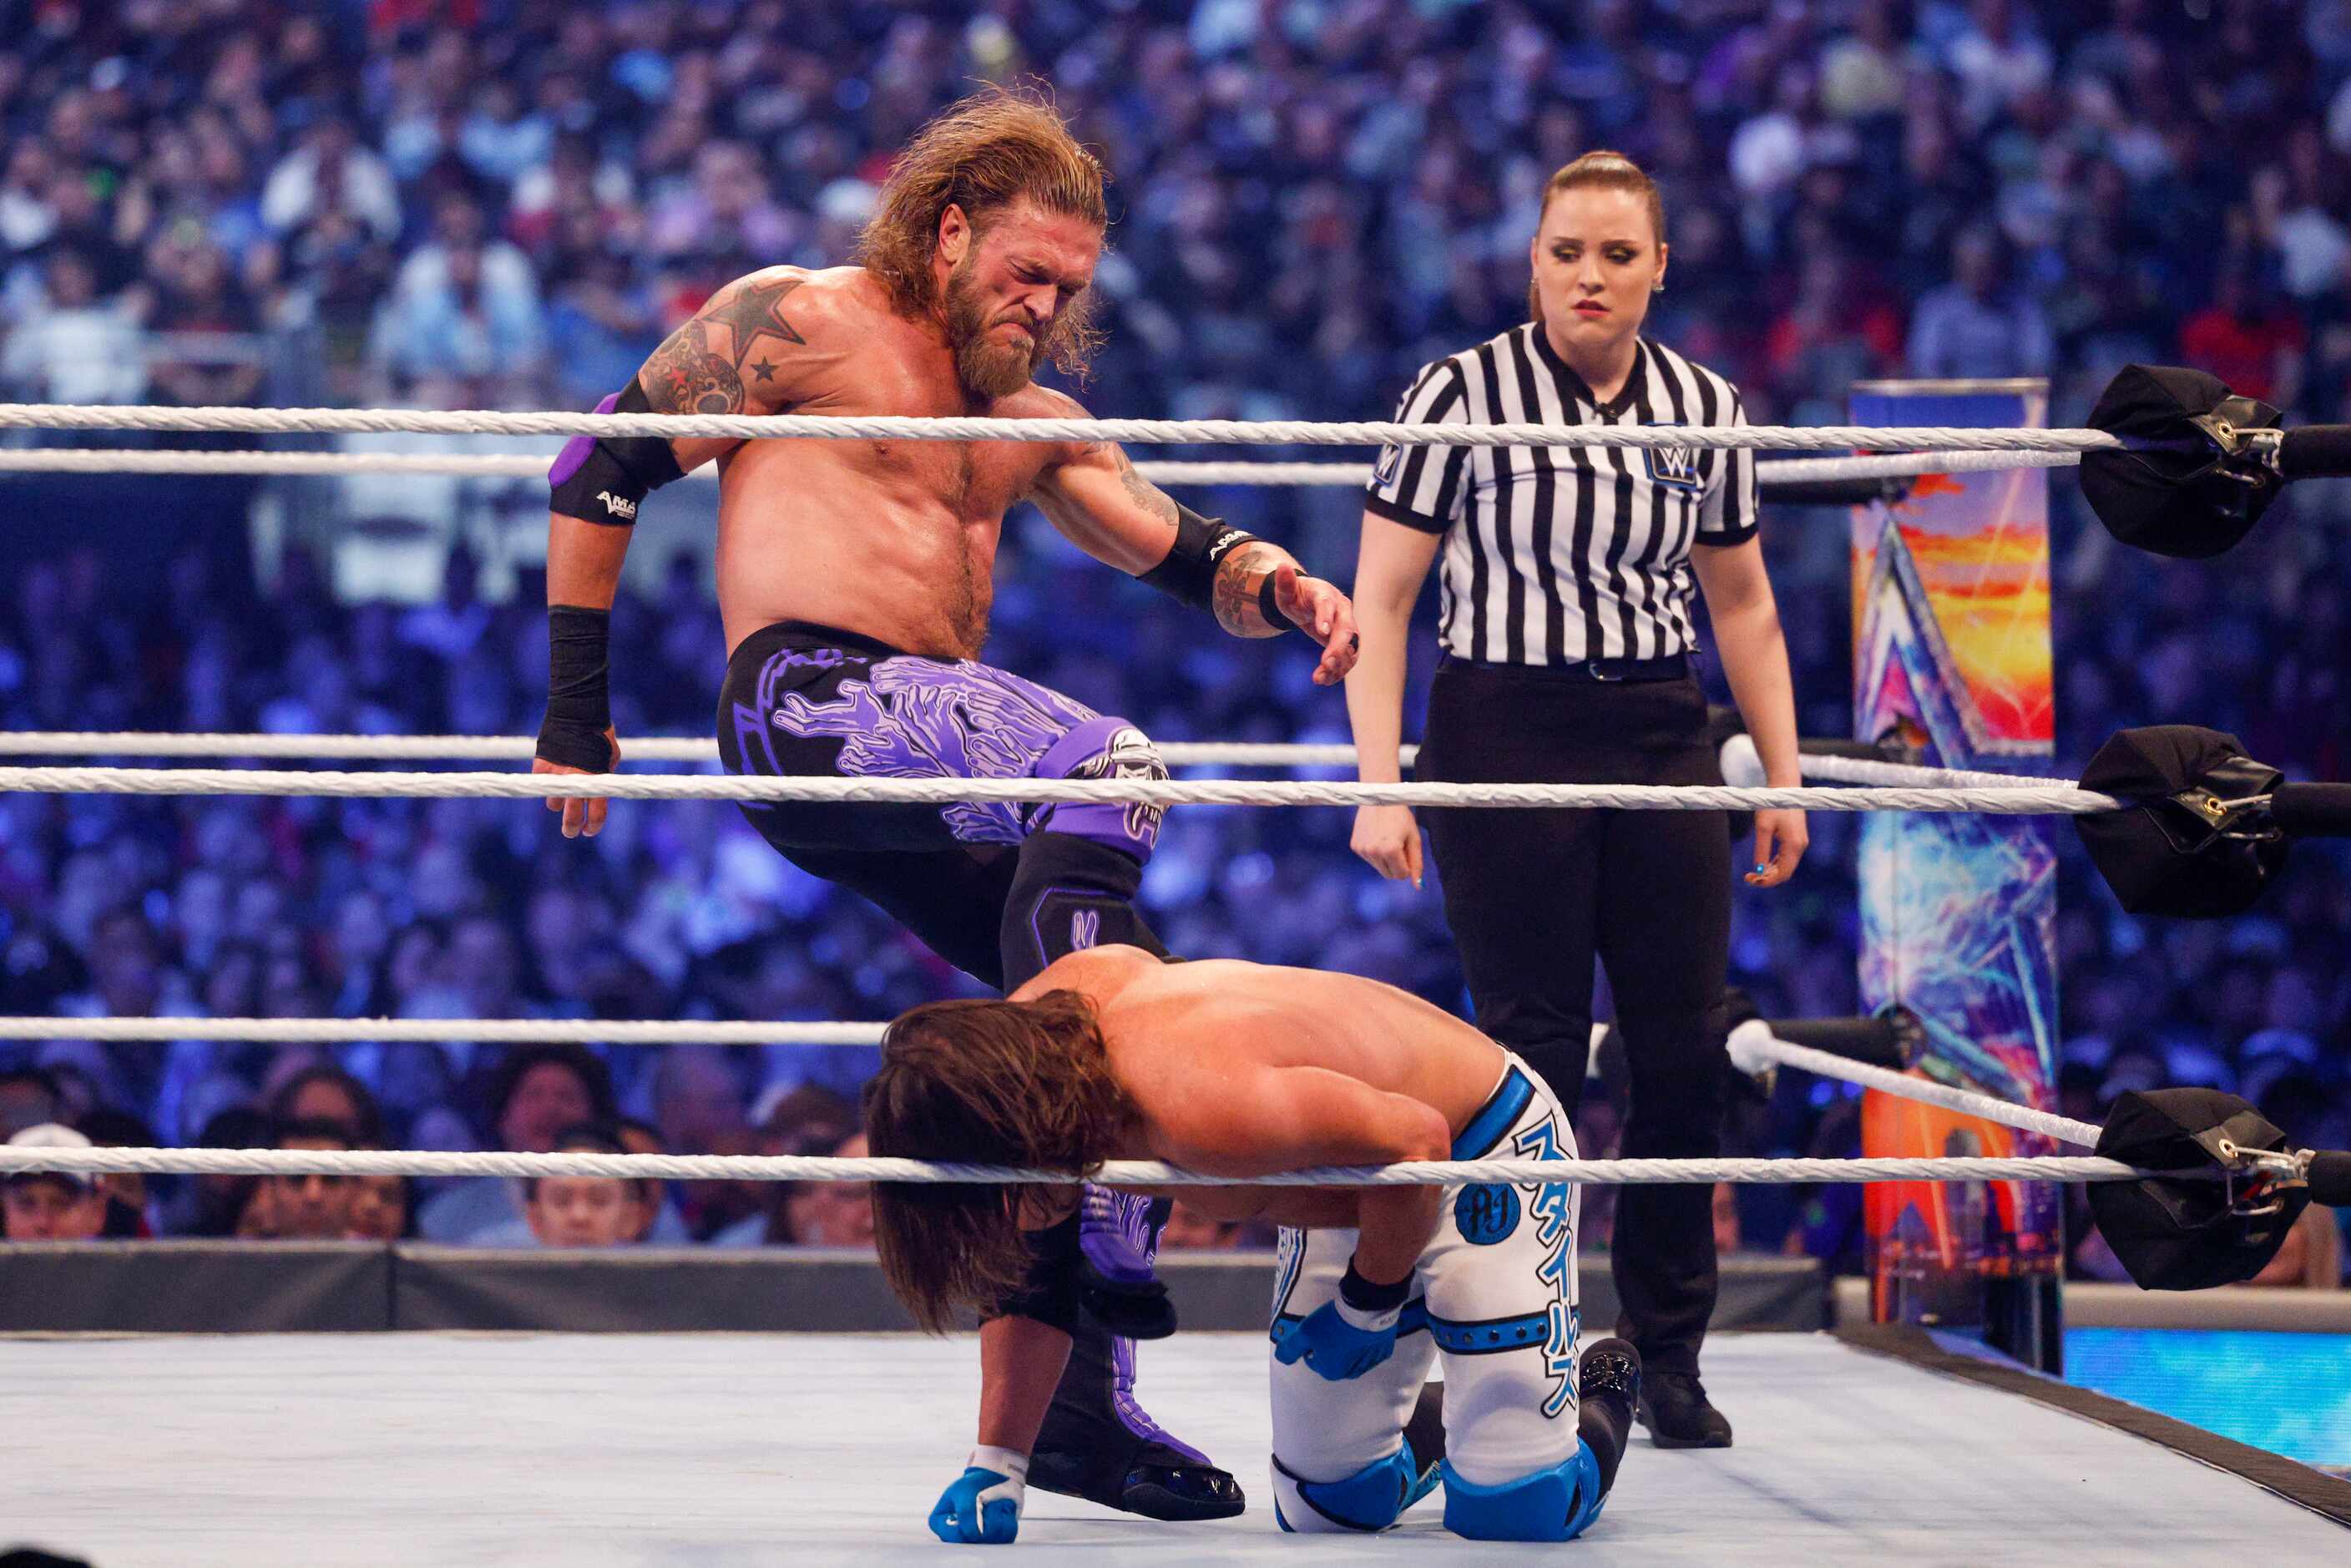 Edge (left) kicks AJ Styles during a match at WrestleMania Sunday at AT&T Stadium in...